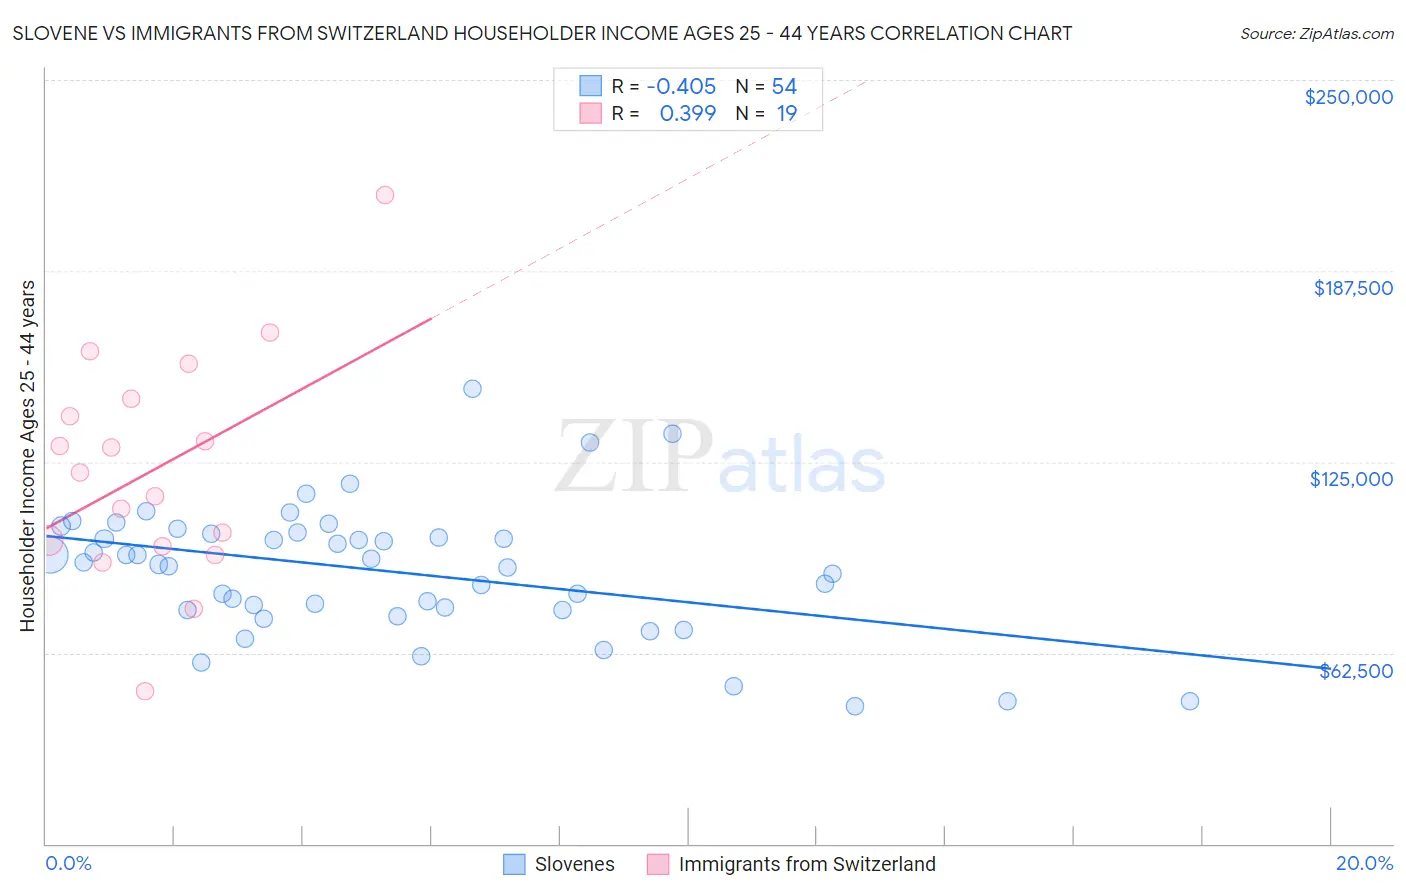 Slovene vs Immigrants from Switzerland Householder Income Ages 25 - 44 years